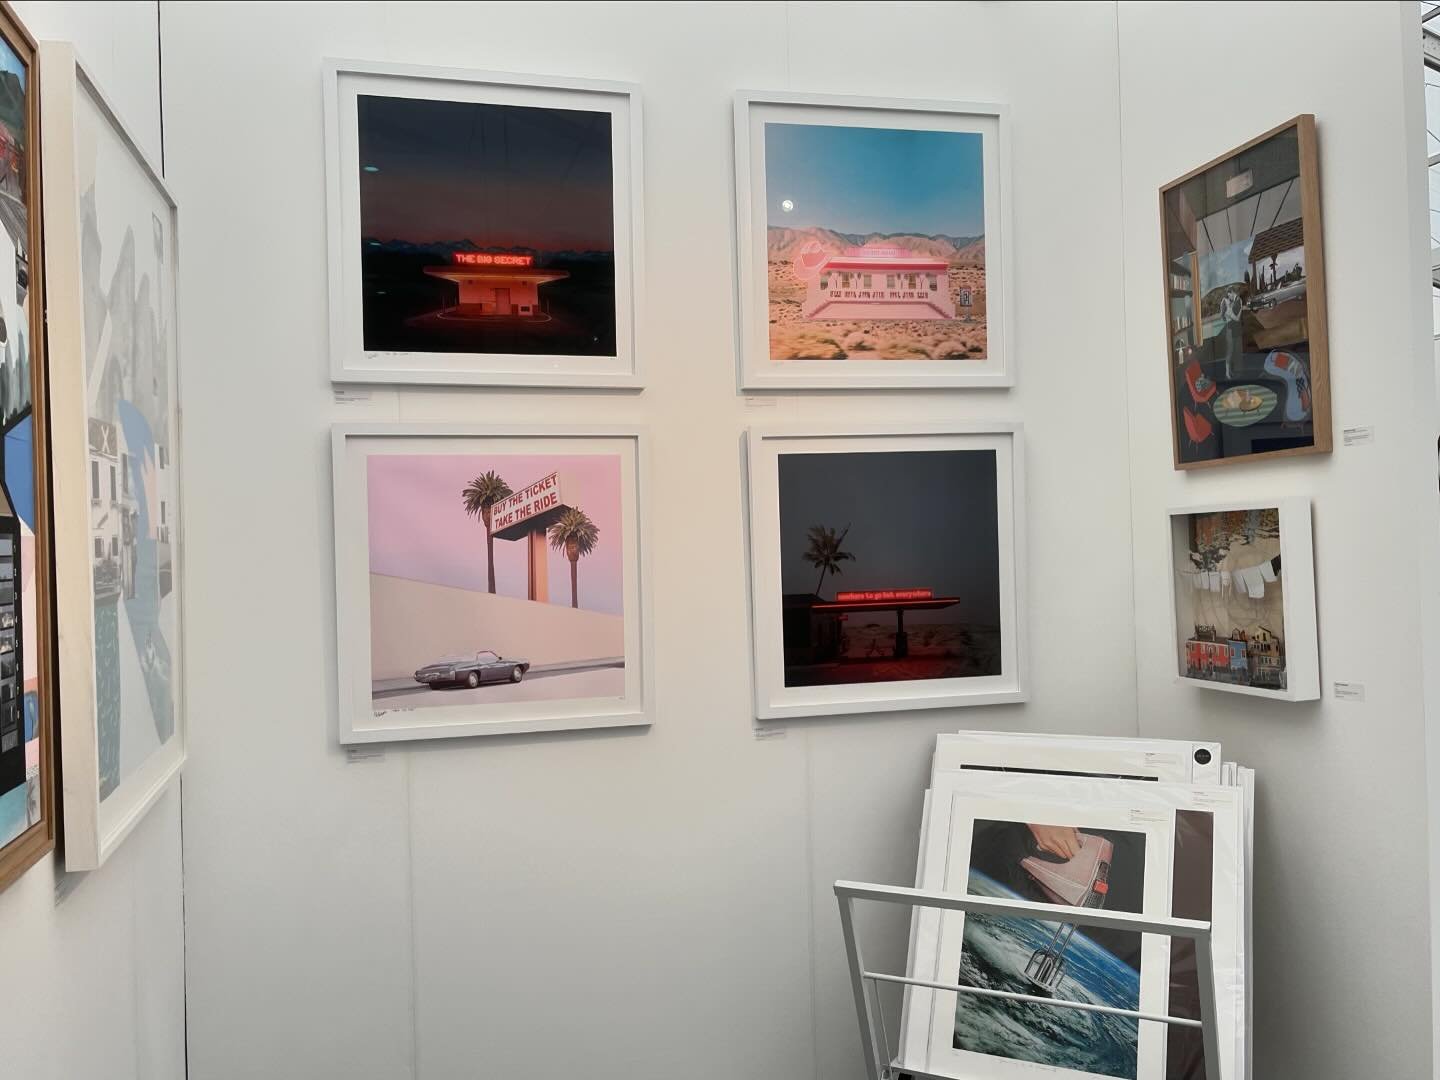 Loving this area of our stand F4 @affordableartfairuk #hampstead. Collages from @bonnieandclydeart , @feialexeli @joewebbart @francescalupo.art and @francesbloomfield looking gorgeous 🤩🤩